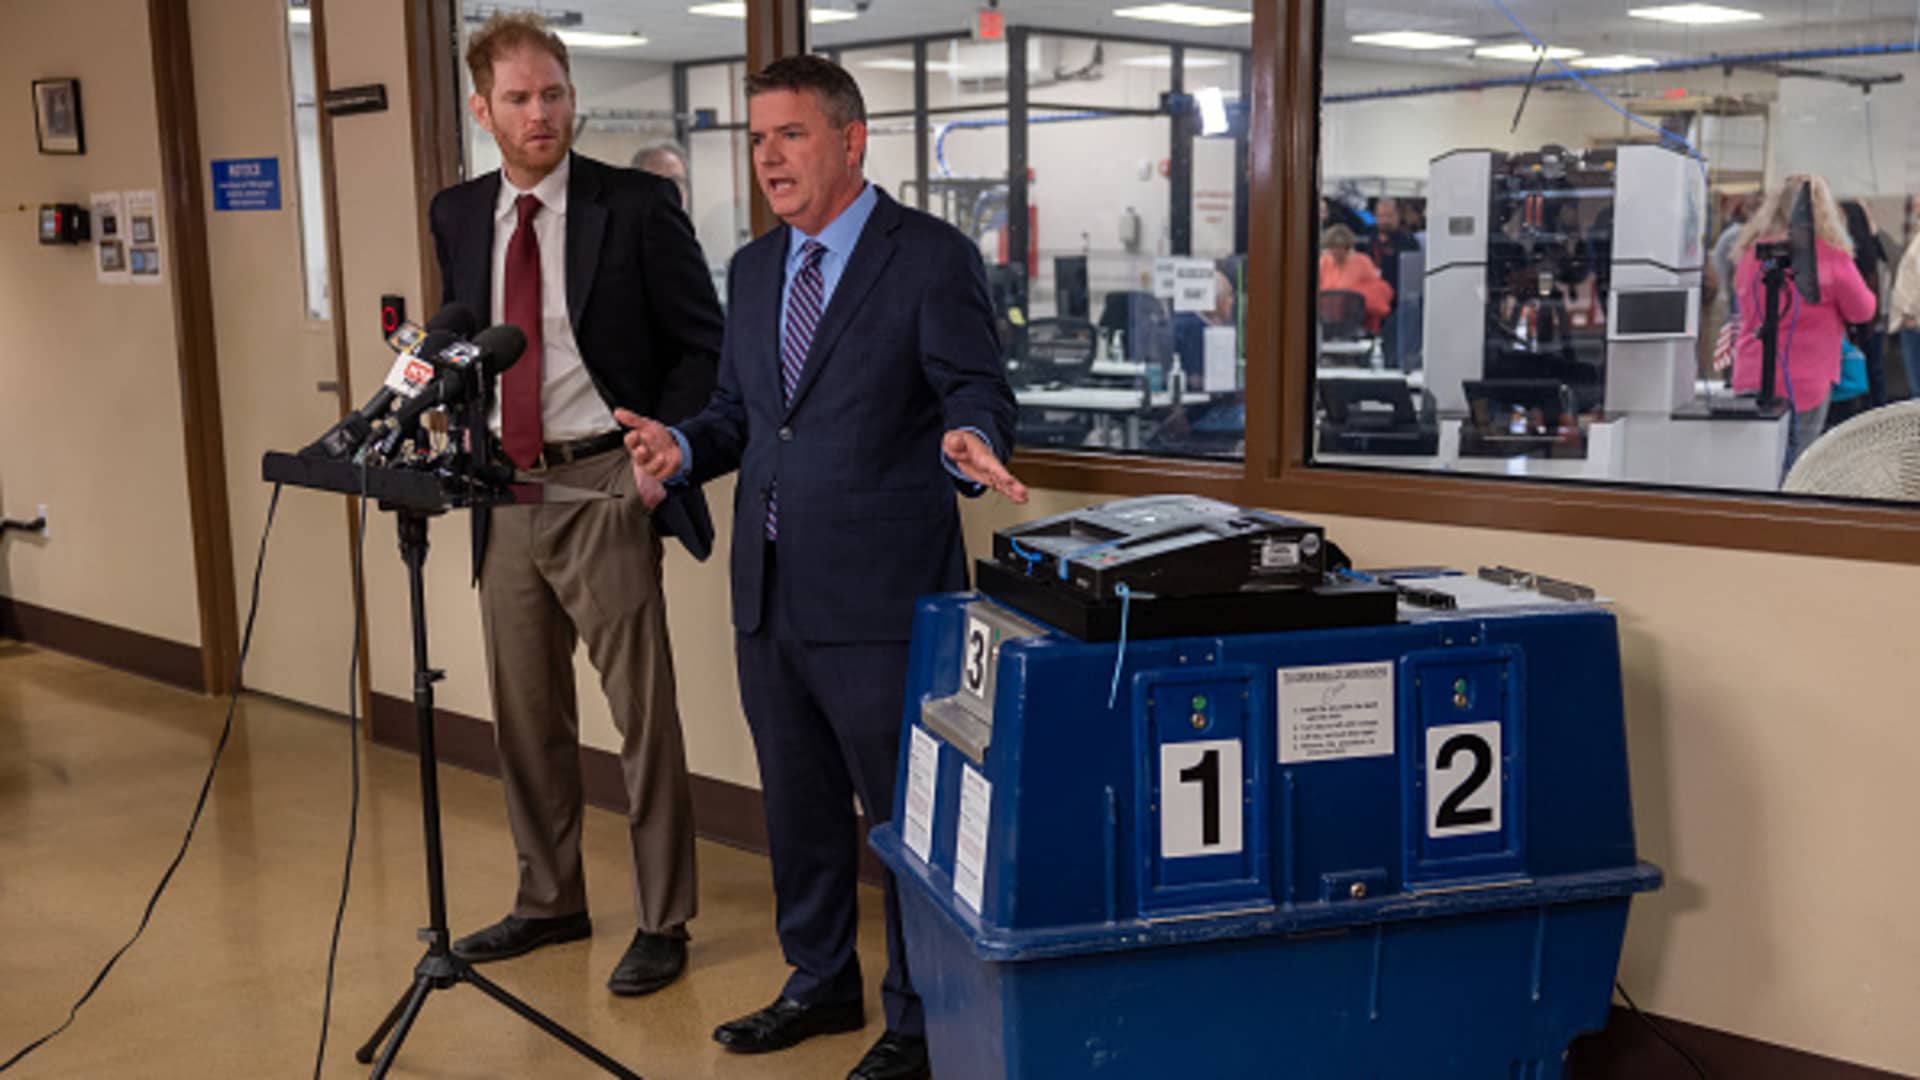 Bill Gates, Chairman of the Maricopa Board of Supervisors, speaks about voting machine malfunctions at the Maricopa County Tabulation and Election Center on November 08, 2022 in Phoenix, Arizona.